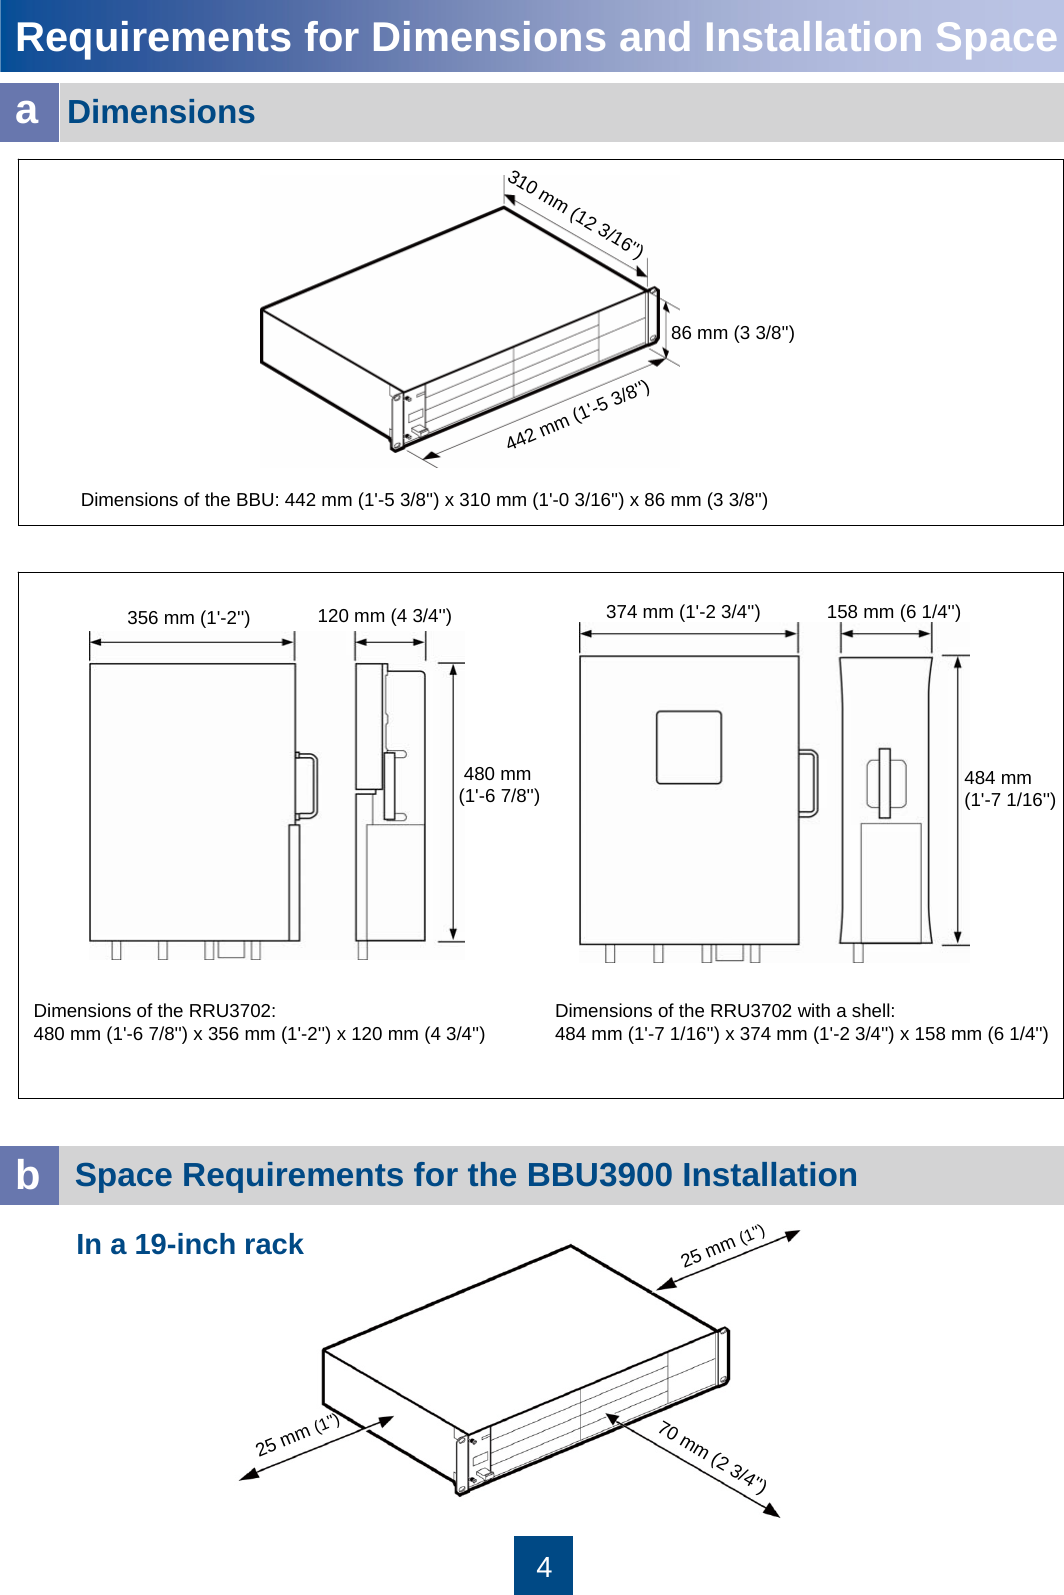 4Requirements for Dimensions and Installation SpaceDimensionsDimensions of the RRU3702 with a shell: 484 mm (1&apos;-7 1/16&apos;&apos;) x 374 mm (1&apos;-2 3/4&apos;&apos;) x 158 mm (6 1/4&apos;&apos;)Dimensions of the RRU3702: 480 mm (1&apos;-6 7/8&apos;&apos;) x 356 mm (1&apos;-2&apos;&apos;) x 120 mm (4 3/4&apos;&apos;)a356 mm (1&apos;-2&apos;&apos;) 120 mm (4 3/4&apos;&apos;) 158 mm (6 1/4&apos;&apos;)374 mm (1&apos;-2 3/4&apos;&apos;)484 mm (1&apos;-7 1/16&apos;&apos;)480 mm (1&apos;-6 7/8&apos;&apos;)310 mm (12 3/16&apos;&apos;)86 mm (3 3/8&apos;&apos;)442 mm (1&apos;-5 3/8&apos;&apos;)Dimensions of the BBU: 442 mm (1&apos;-5 3/8&apos;&apos;) x 310 mm (1&apos;-0 3/16&apos;&apos;) x 86 mm (3 3/8&apos;&apos;)Space Requirements for the BBU3900 InstallationIn a 19-inch rackb70 mm (2 3/4&apos;&apos;)25 mm (1&apos;&apos;)25 mm (1&apos;&apos;)